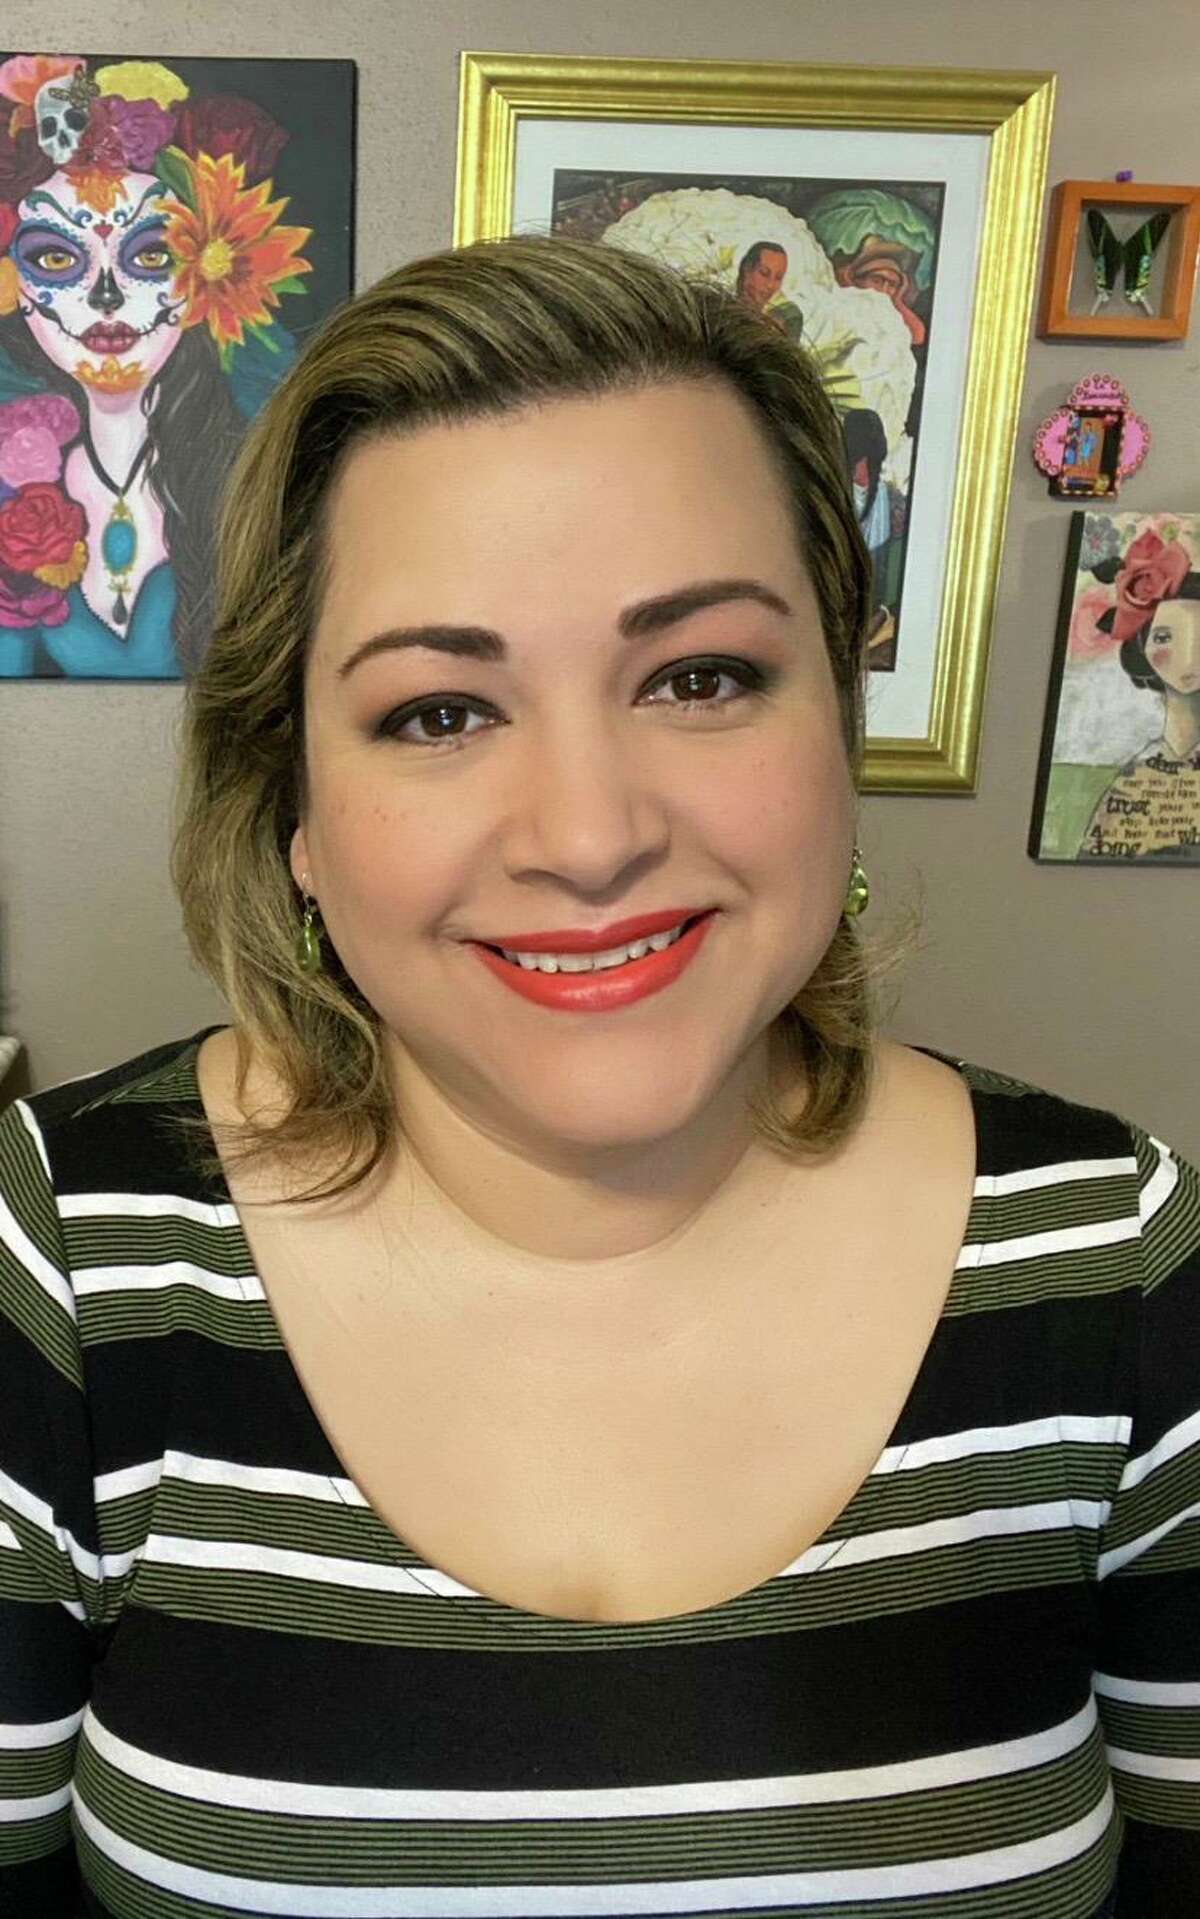 Virginia Elizondo, who ran unsuccessfully for a position on the Spring Branch ISD Board of Trustees in 2015 and 2021, filed a lawsuit against the district and its trustees claiming that the district’s at-large voting system violates the Voting Rights Act of 1965 by diluting minority voting power.